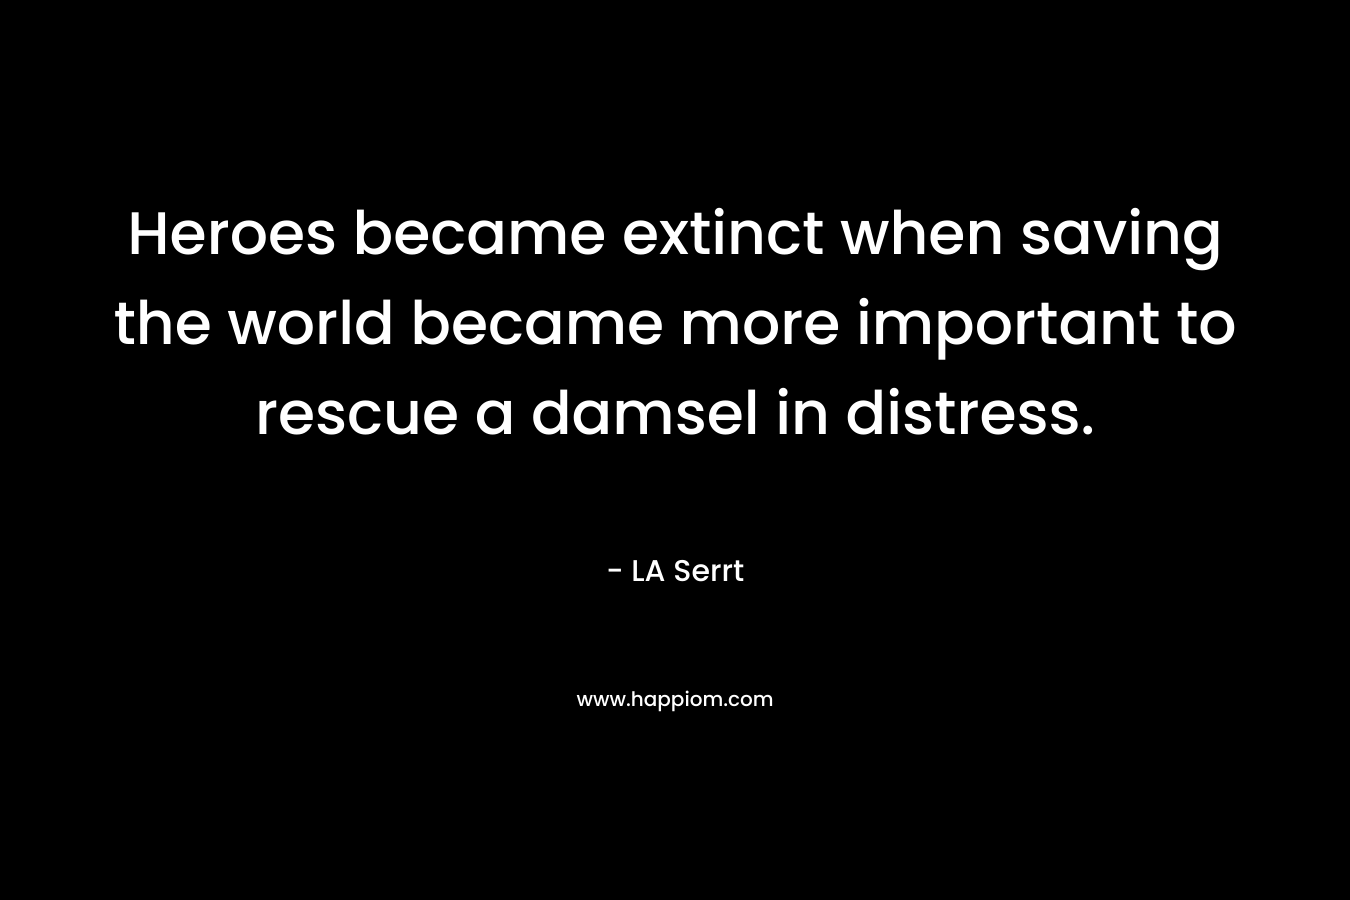 Heroes became extinct when saving the world became more important to rescue a damsel in distress.